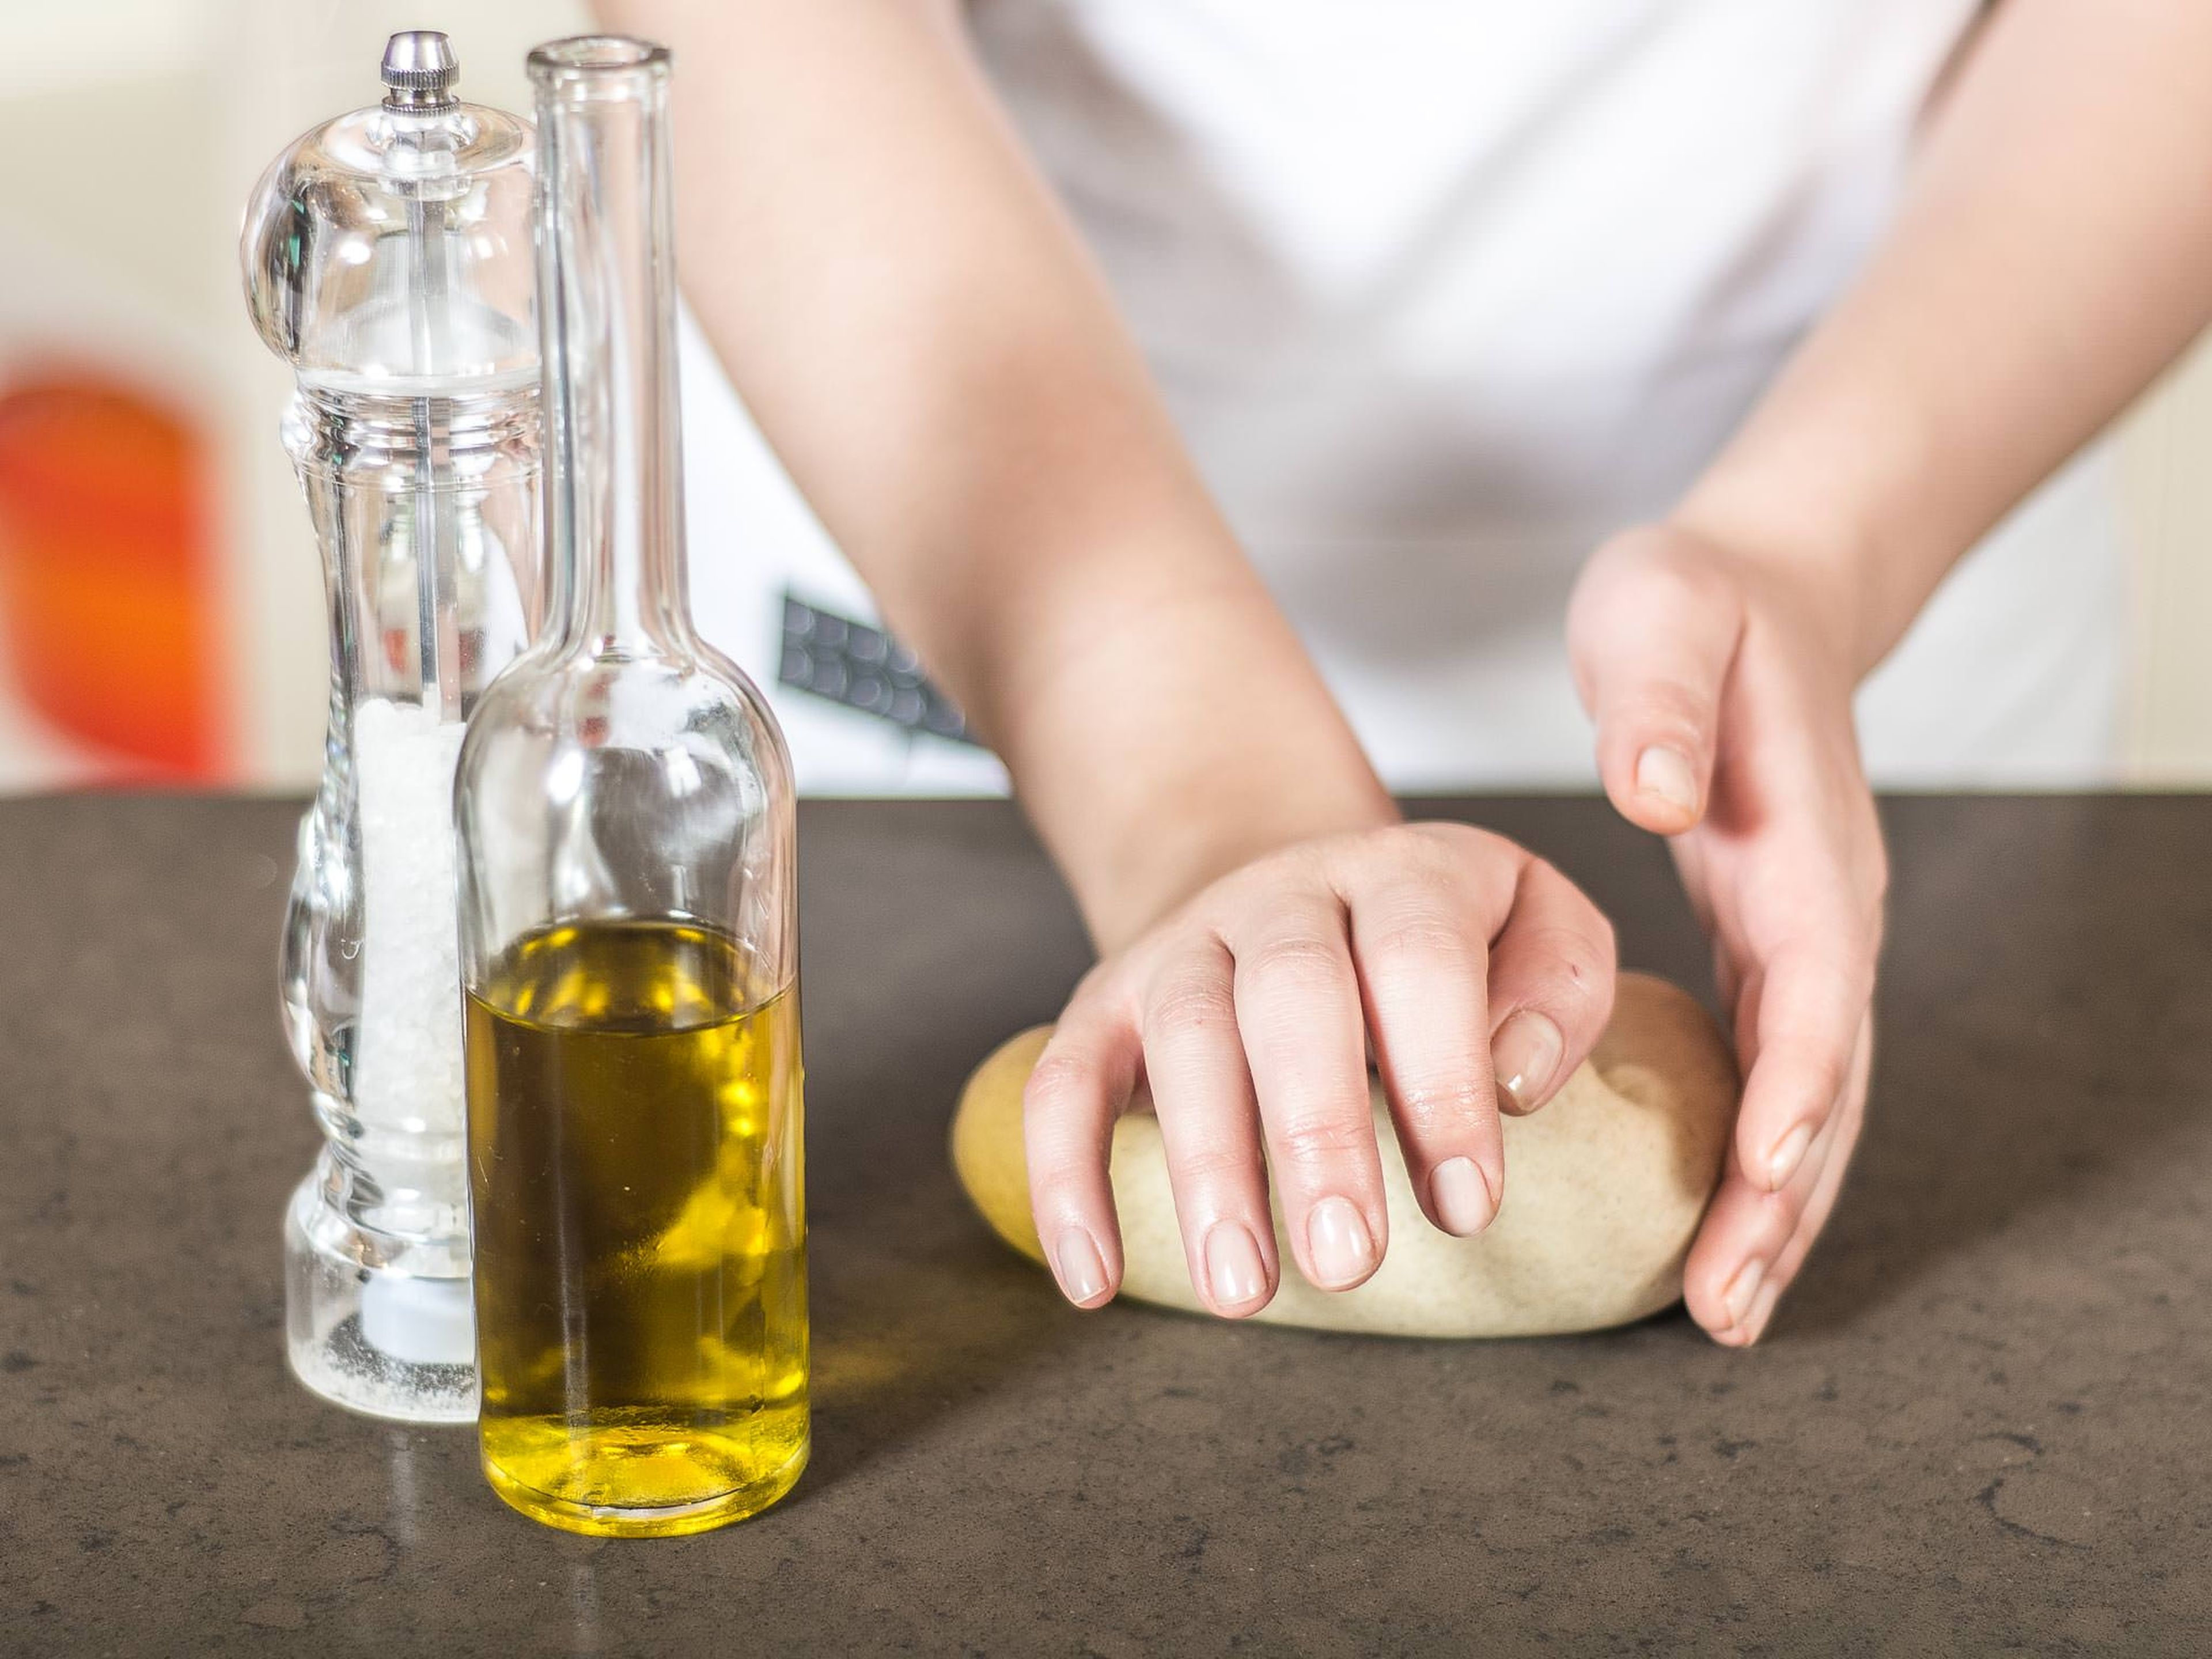 Add salt and olive oil to the dough and knead until fully incorporated. Cover and allow to rise for approx. 40 – 45 min.